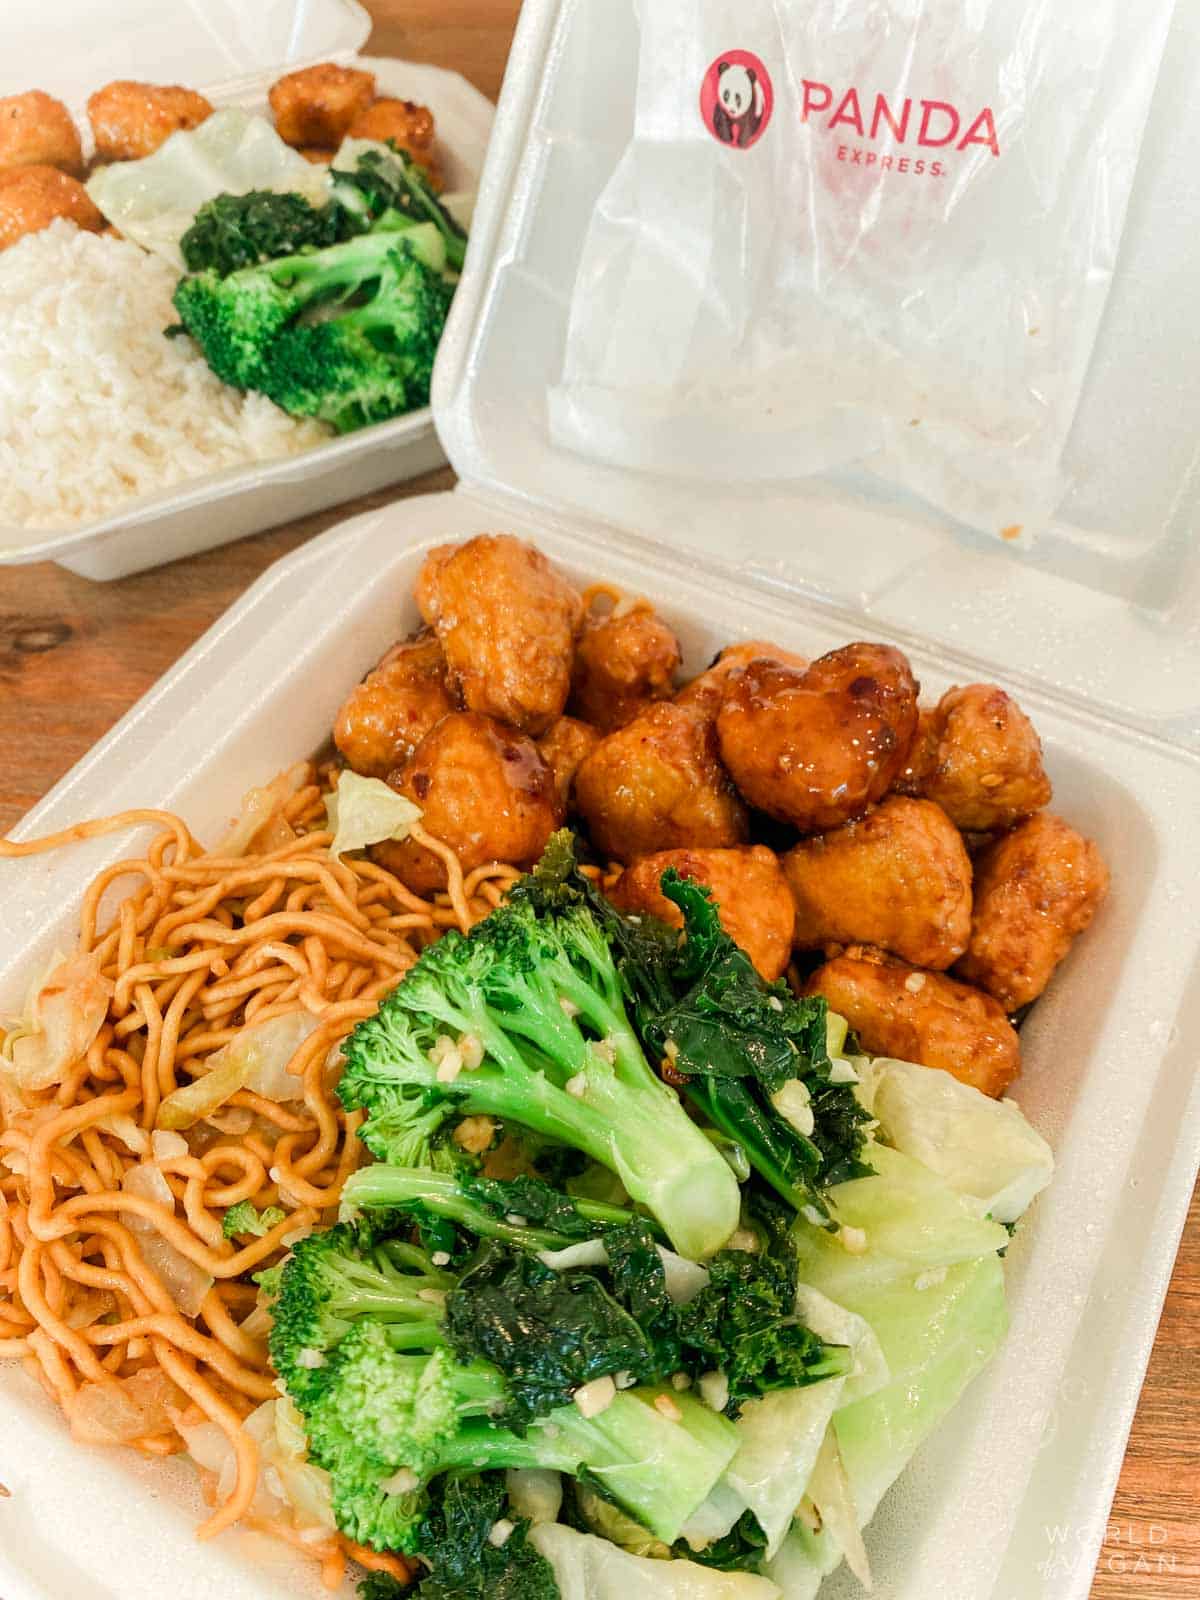 takeout box of vegan items from panda express with beyond orange chicken chow mein and super greens